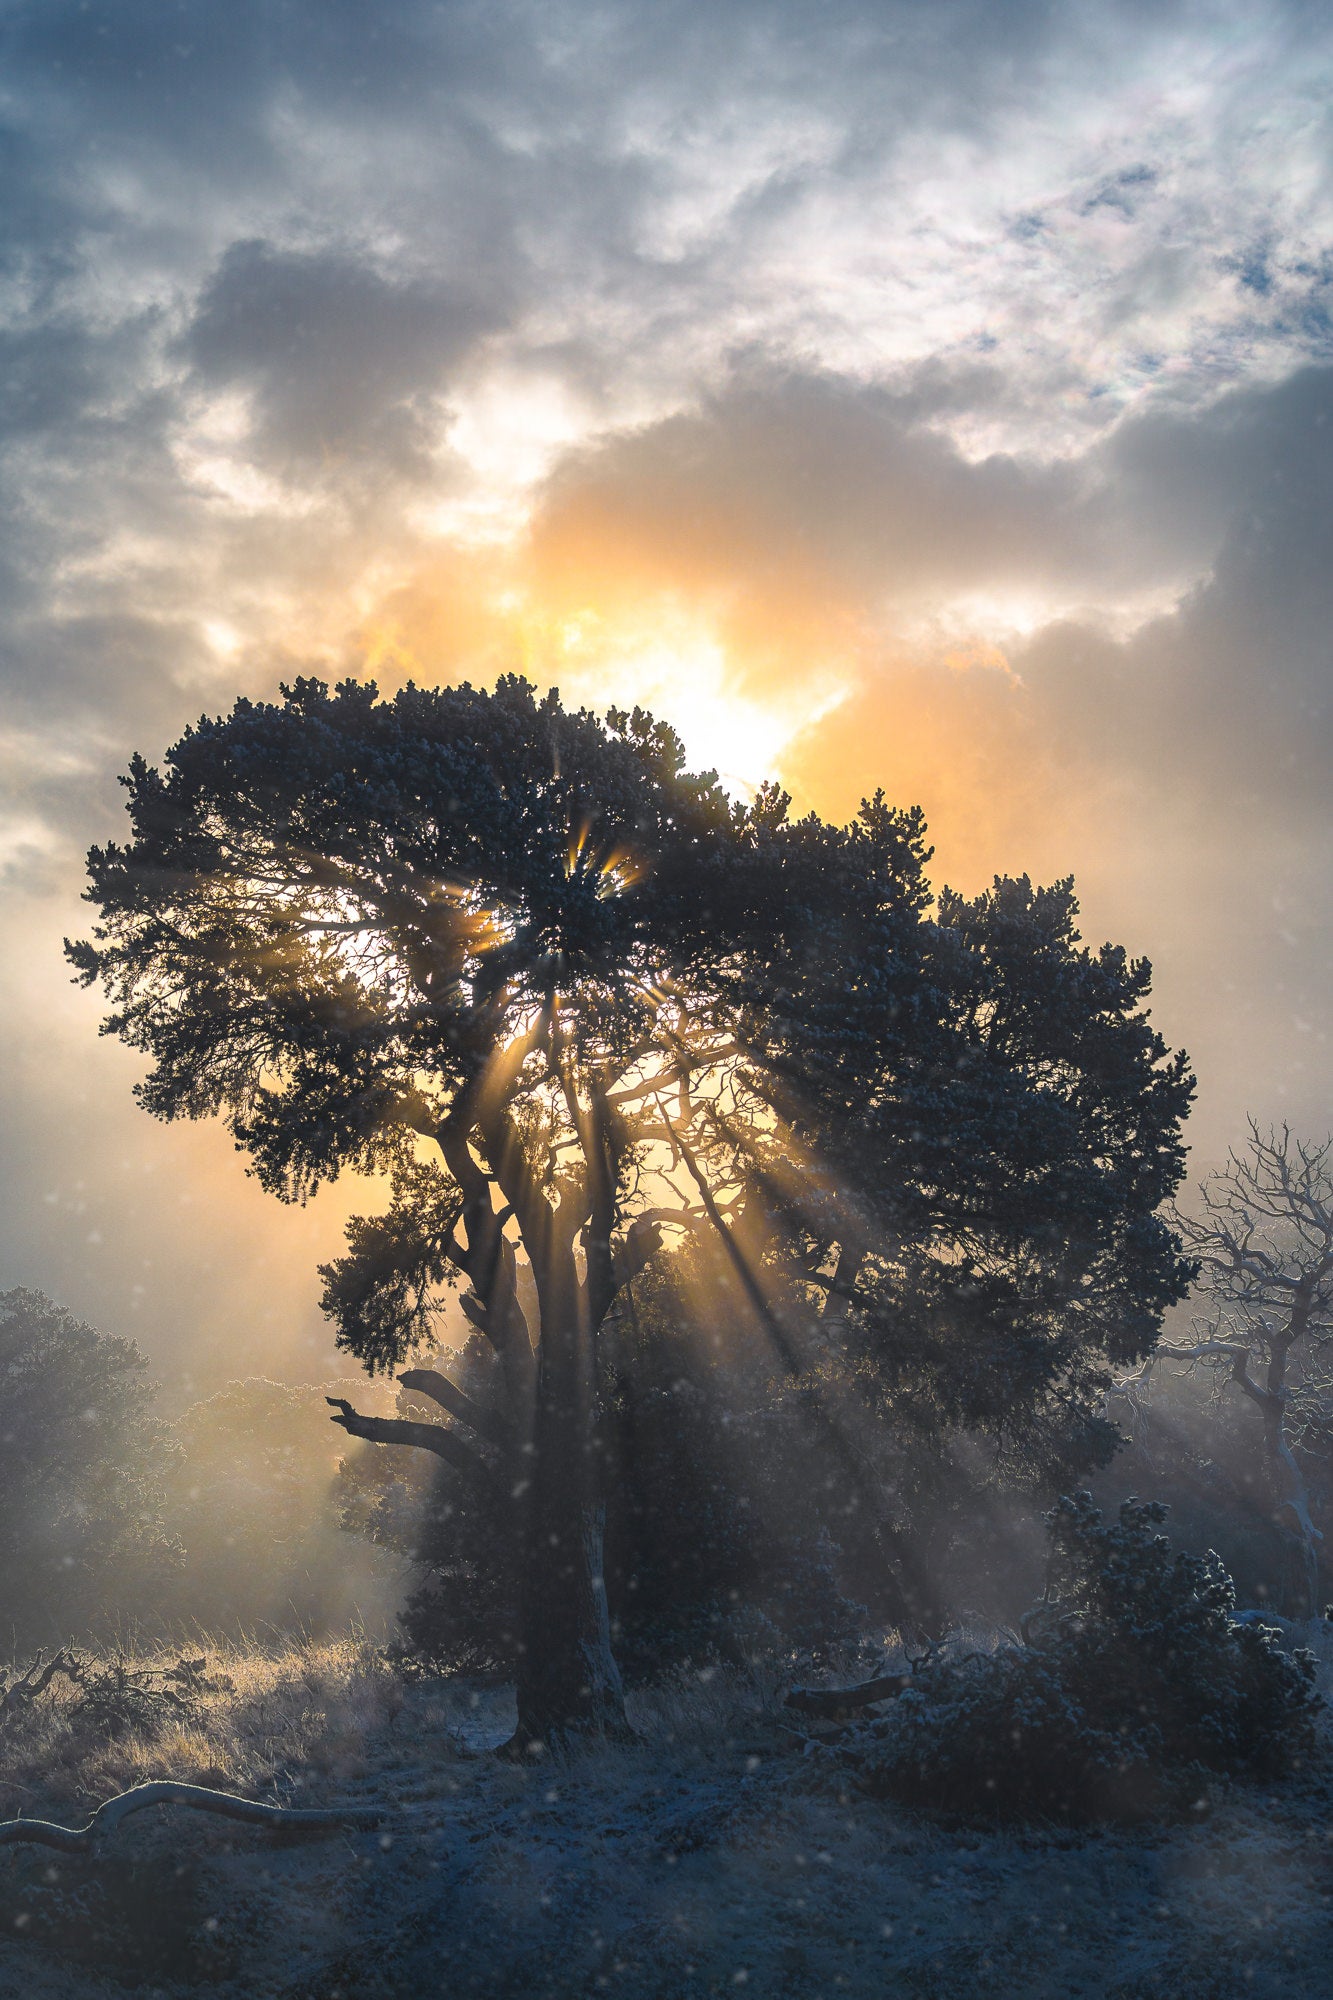 Some fog helps the morning sun to create some golden rays of light through this tree in southern Colorado. Photo by Dylan McMains. Sony Alpha 7 III. Sony 70-200mm f/2.8 G Master. 1/5000-sec., f/4, ISO 100